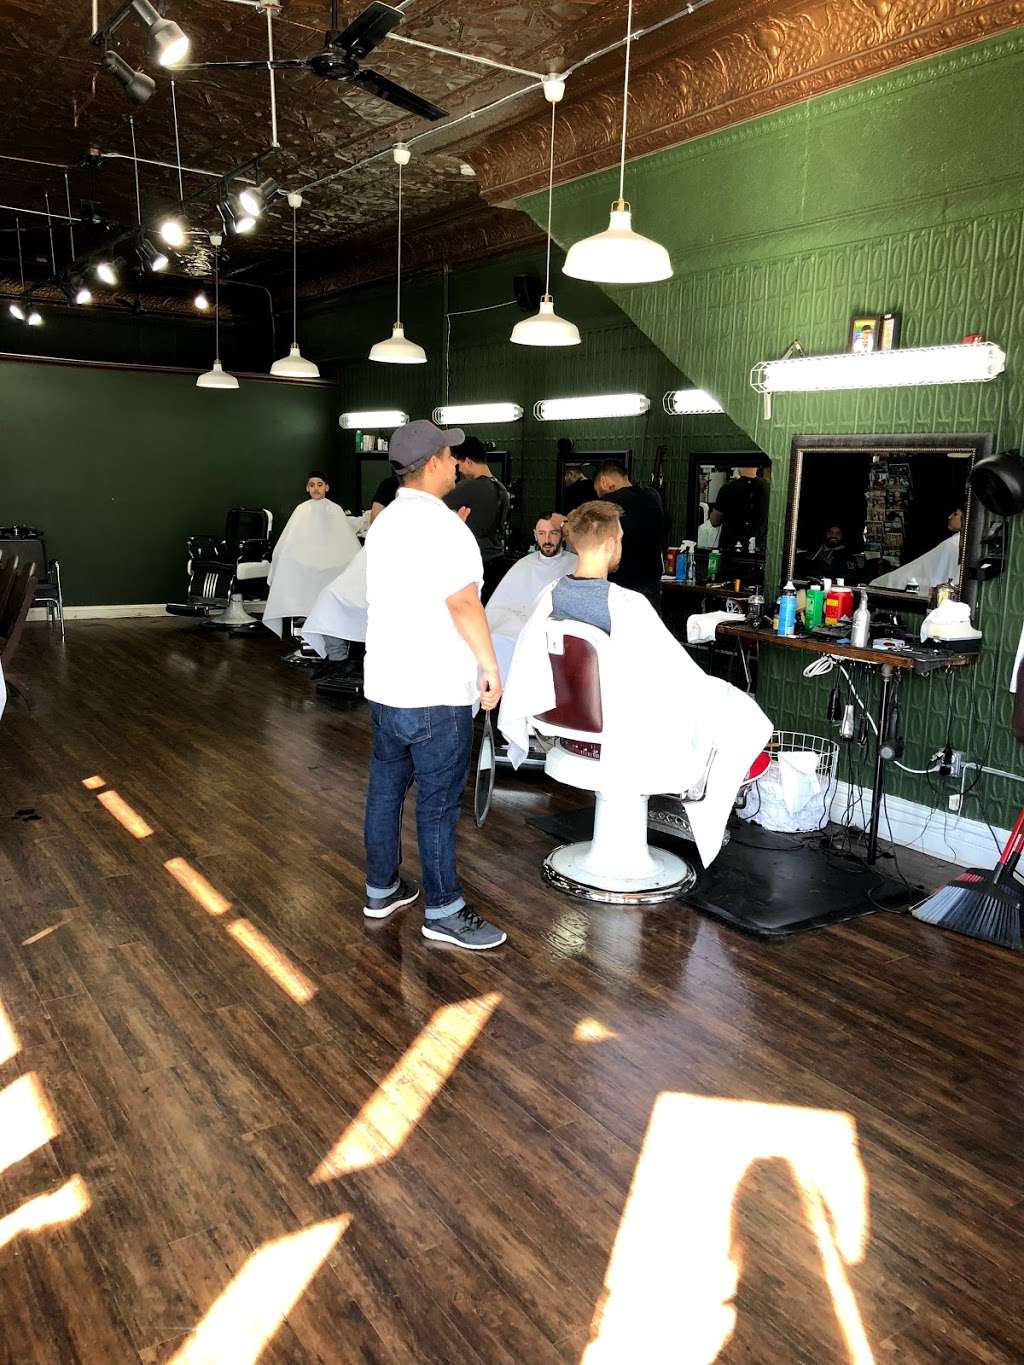 Barkers Barbershop | 818 W 18th St, Chicago, IL 60608, USA | Phone: (312) 846-6197